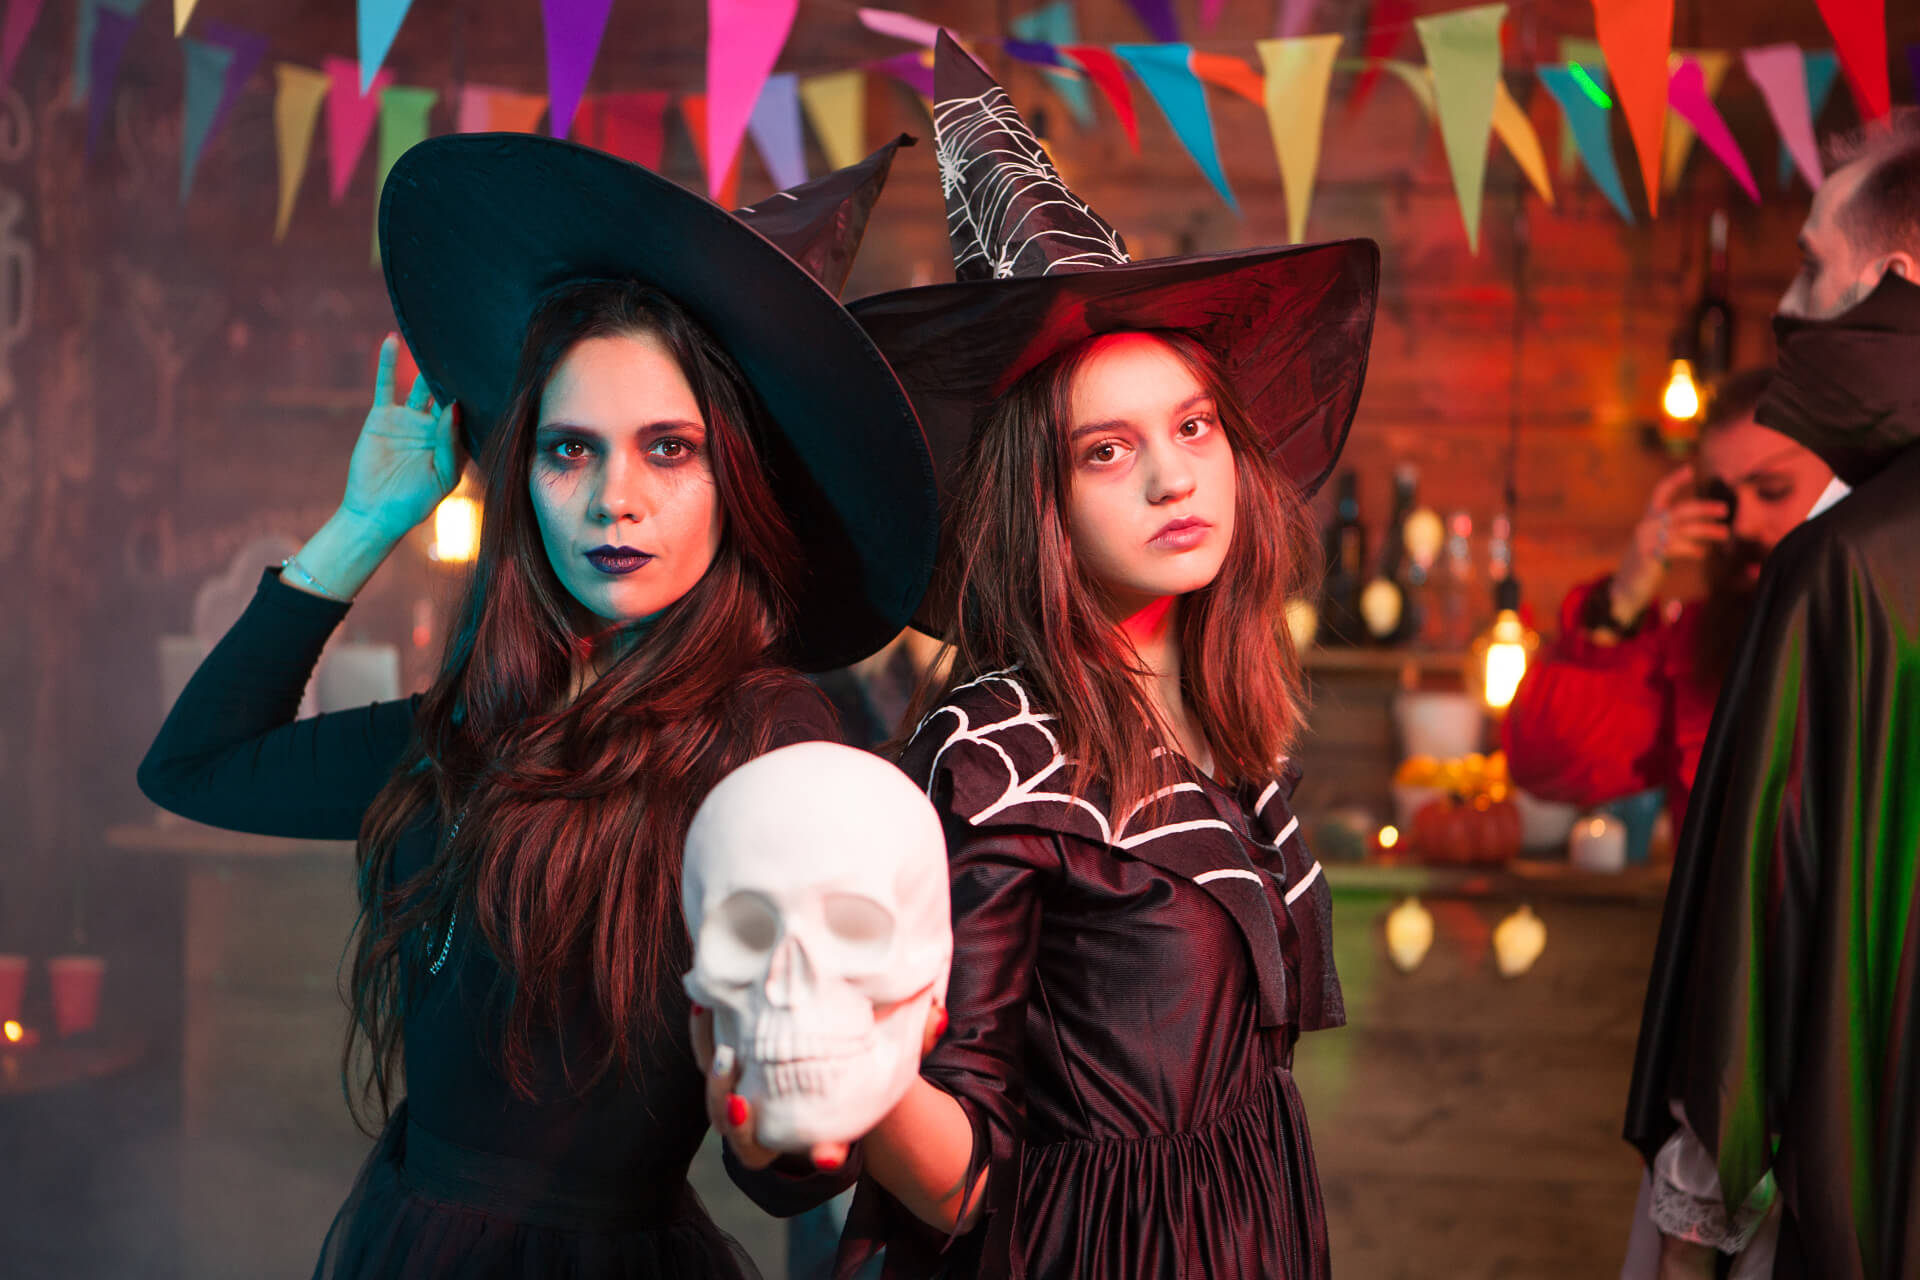 Get ready for the spookiest night of the year and discover hauntingly beautiful Halloween costumes for an unforgettable party!